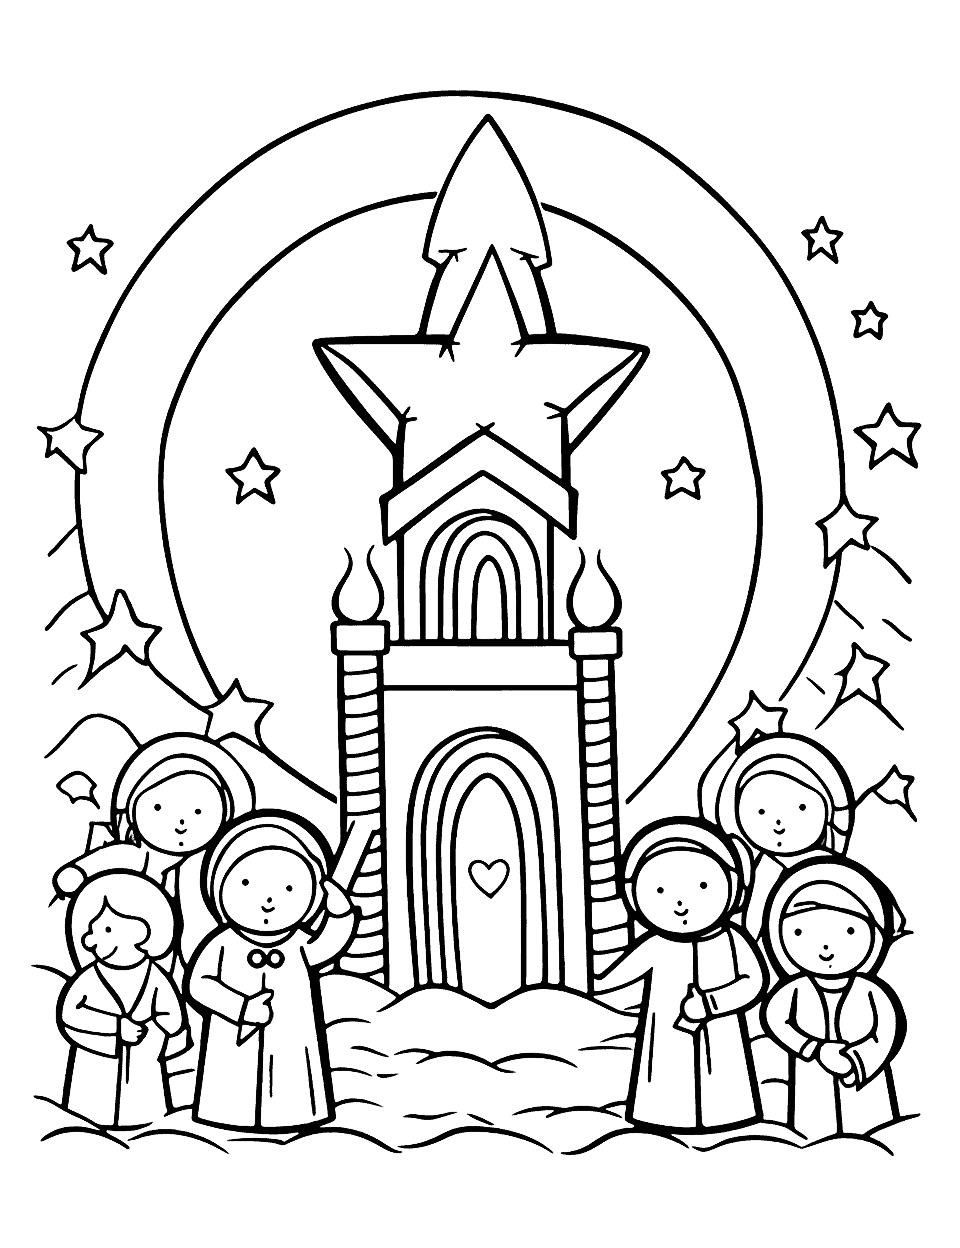 Midnight Mass Christmas Coloring Page - A peaceful scene of a midnight mass with candles and a choir.